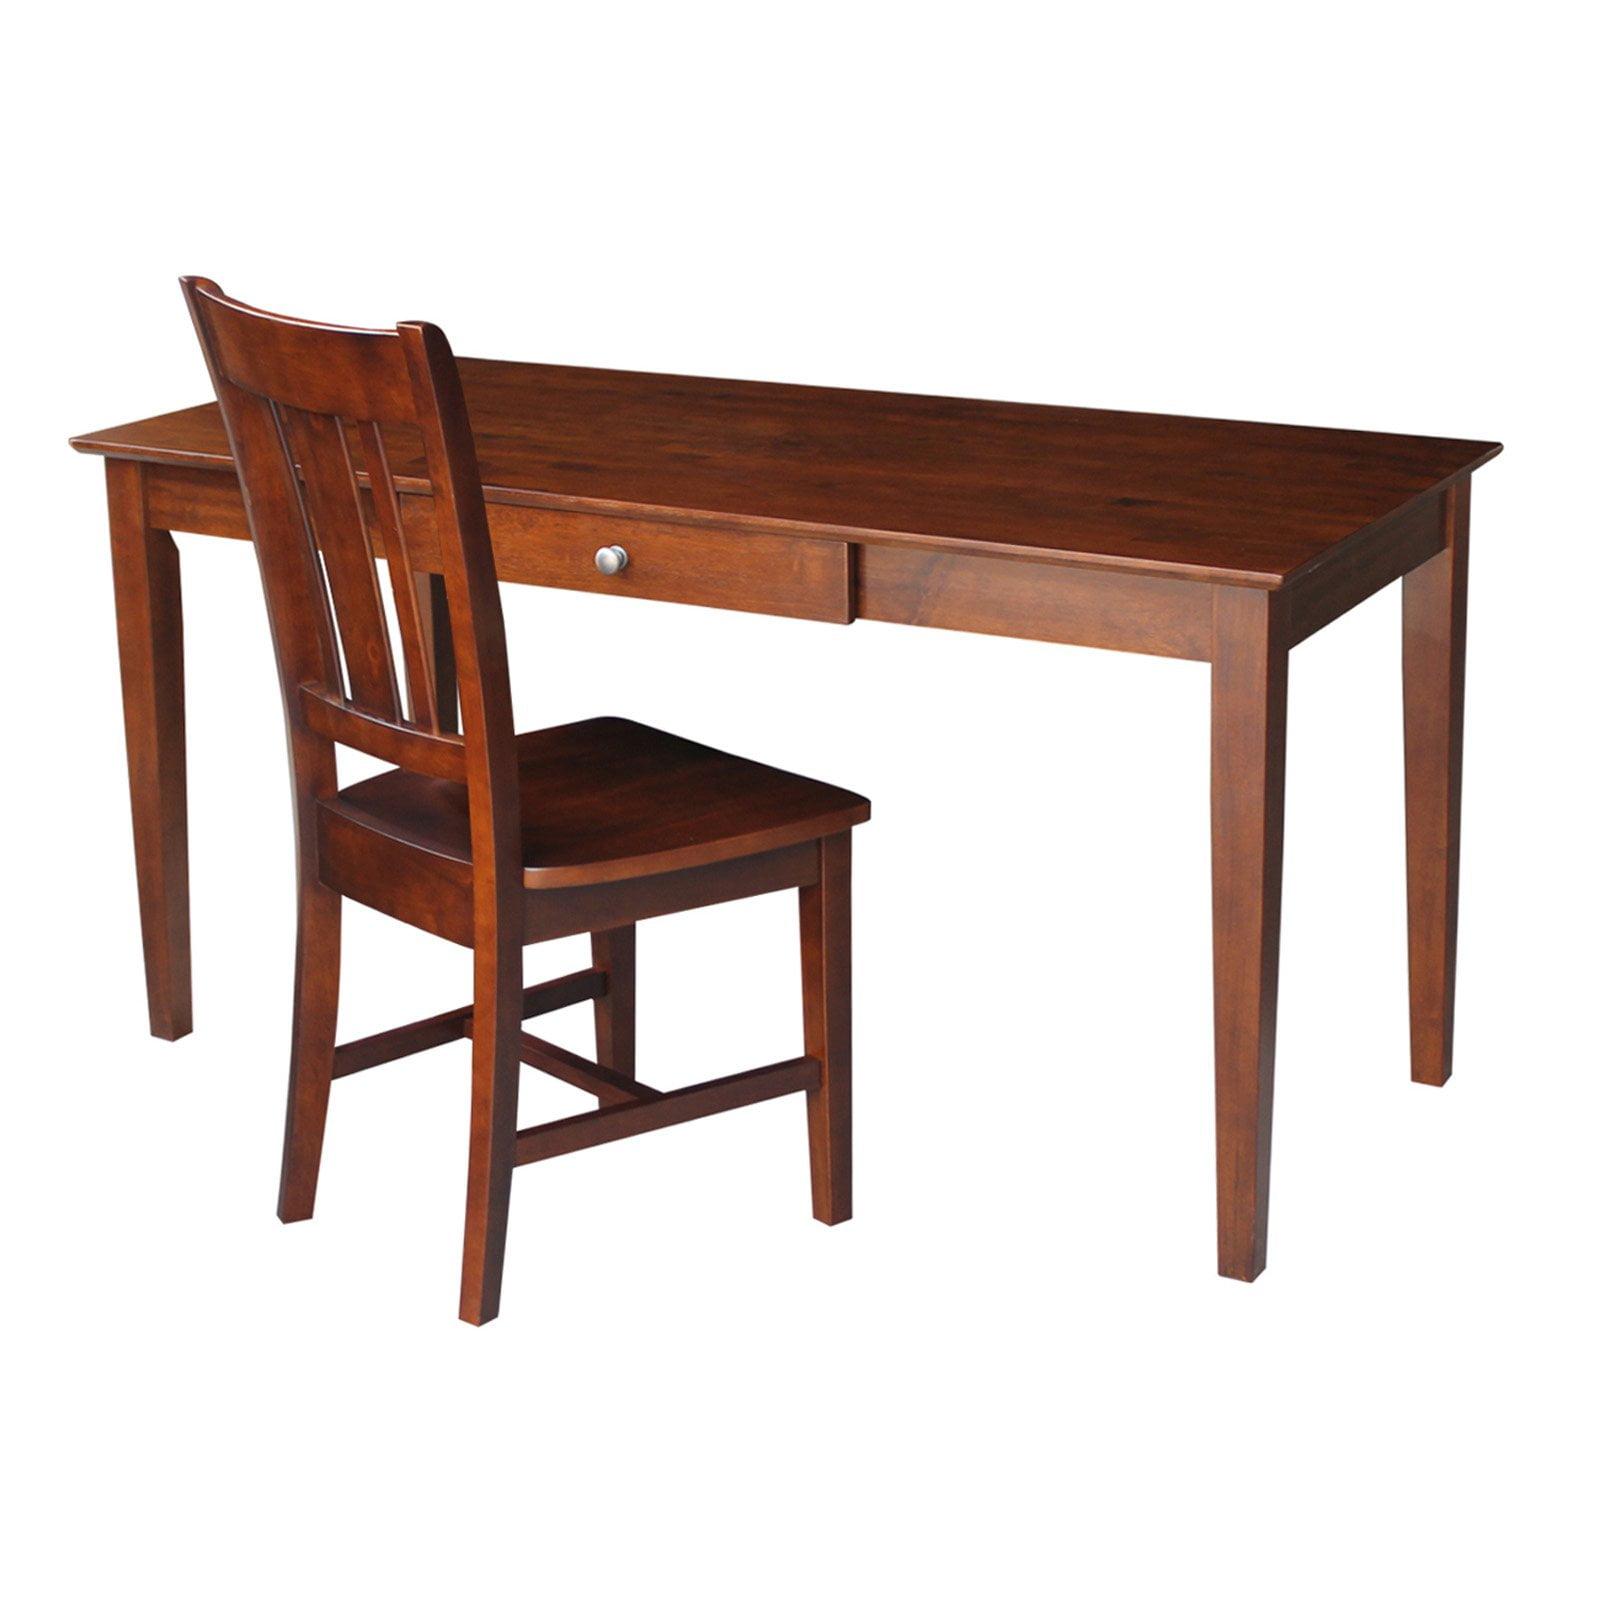 Espresso Rubberwood Desk with Drawer and Matching Chair Set